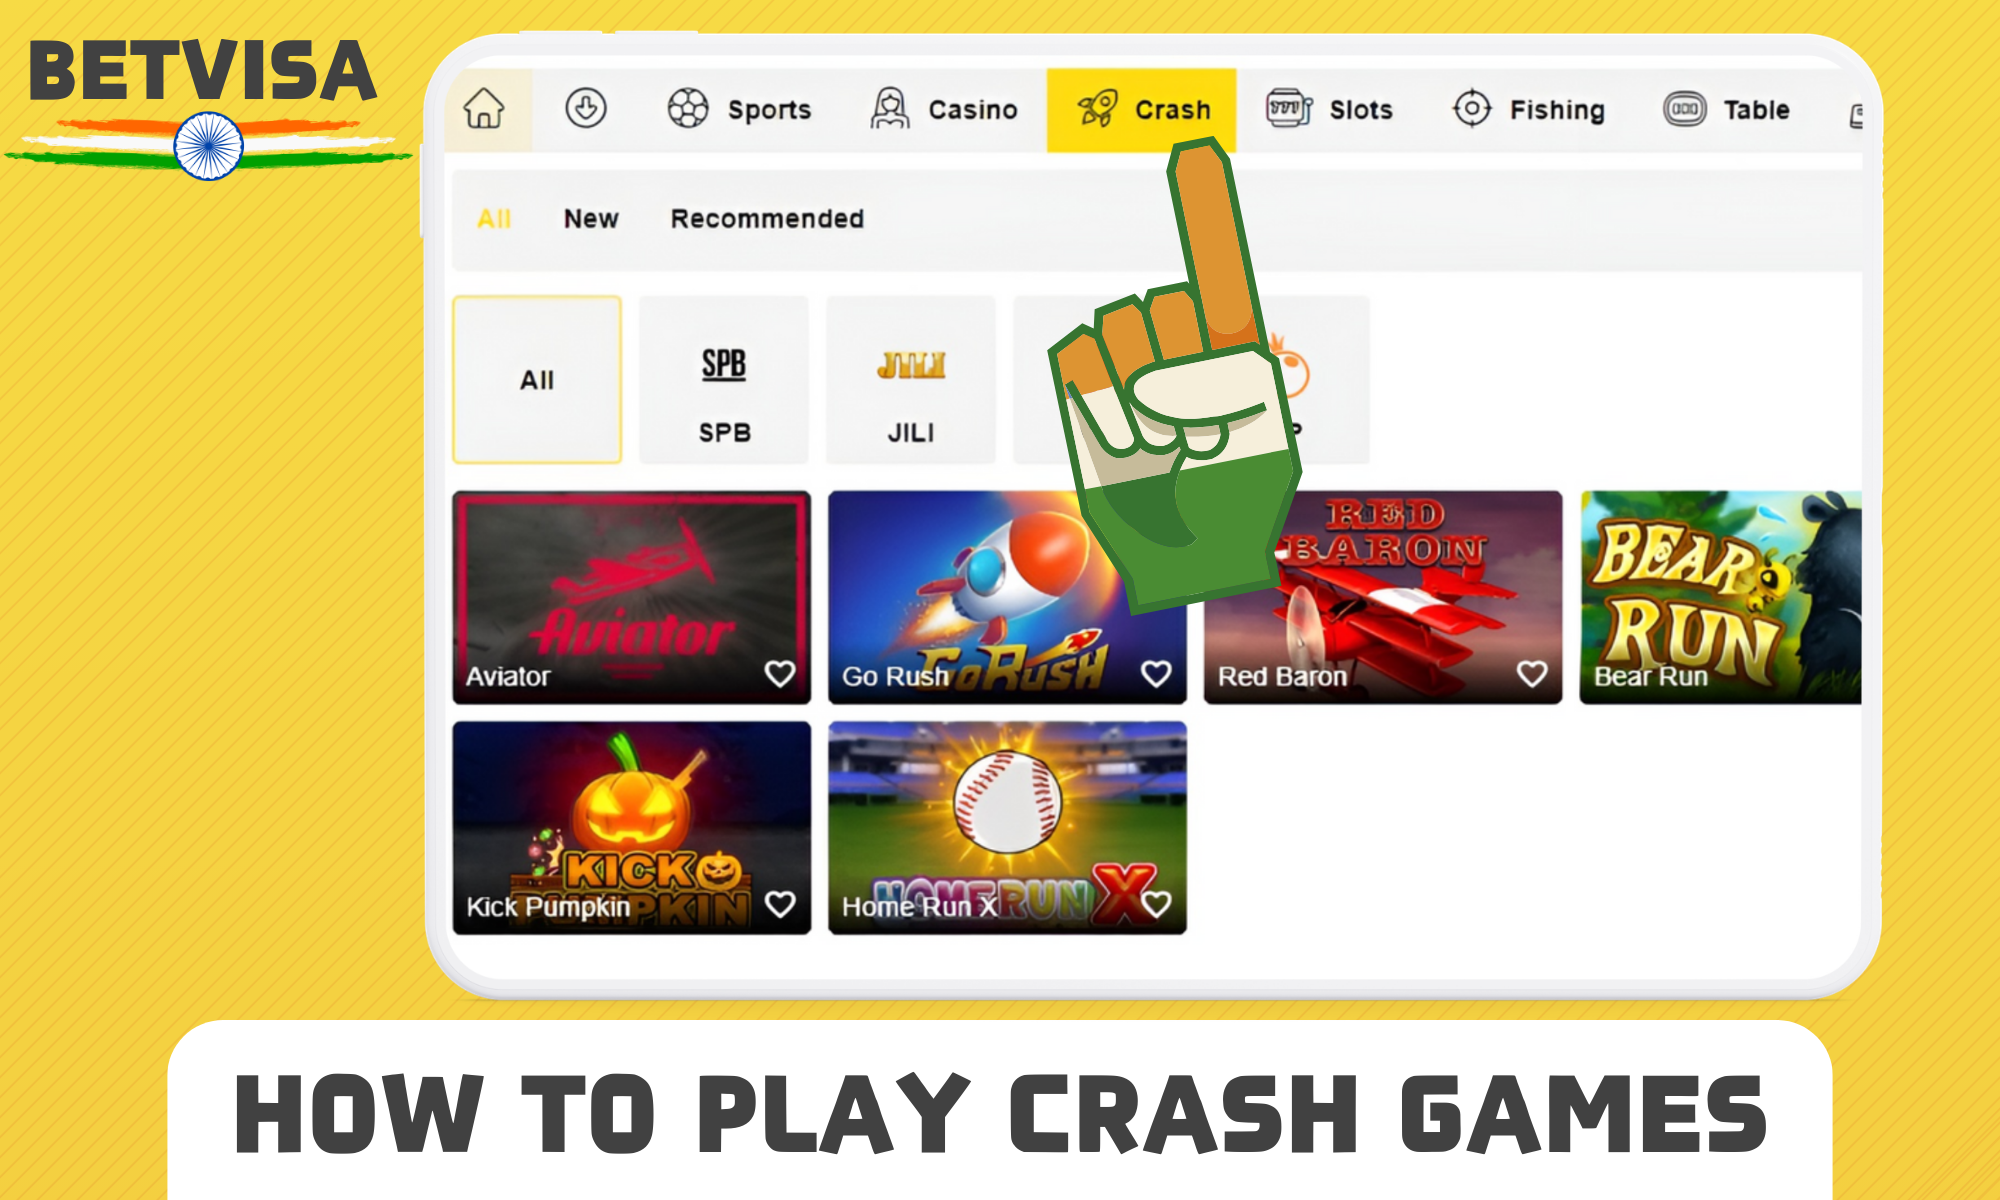 Instructions on how to start playing Crash games at Betvisa